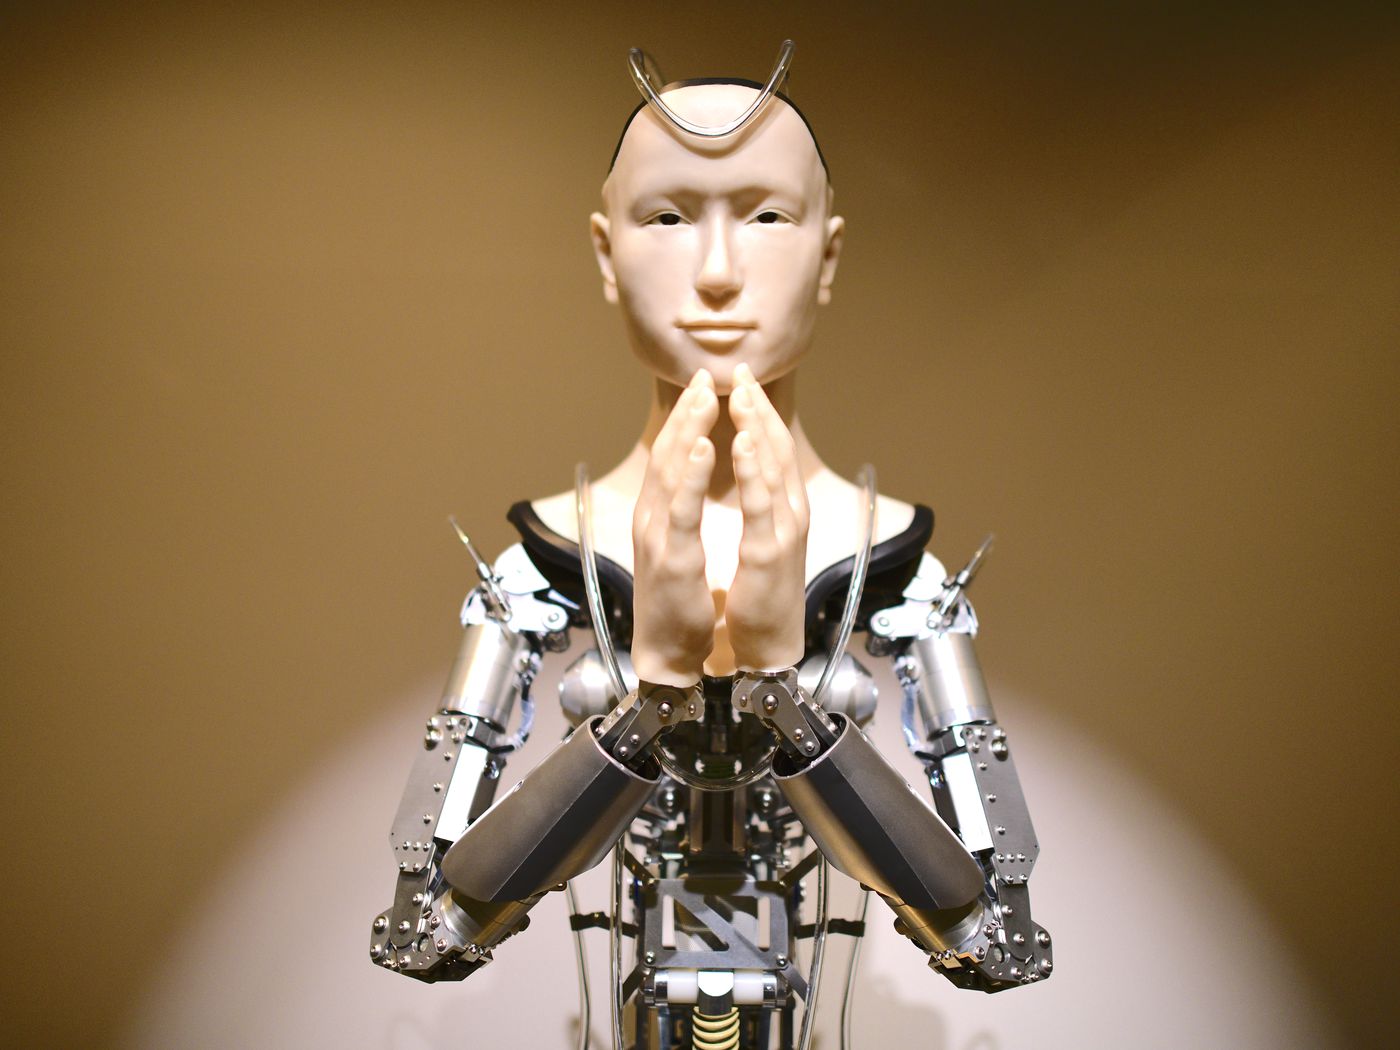 AI will transform religion with robot priests like this one